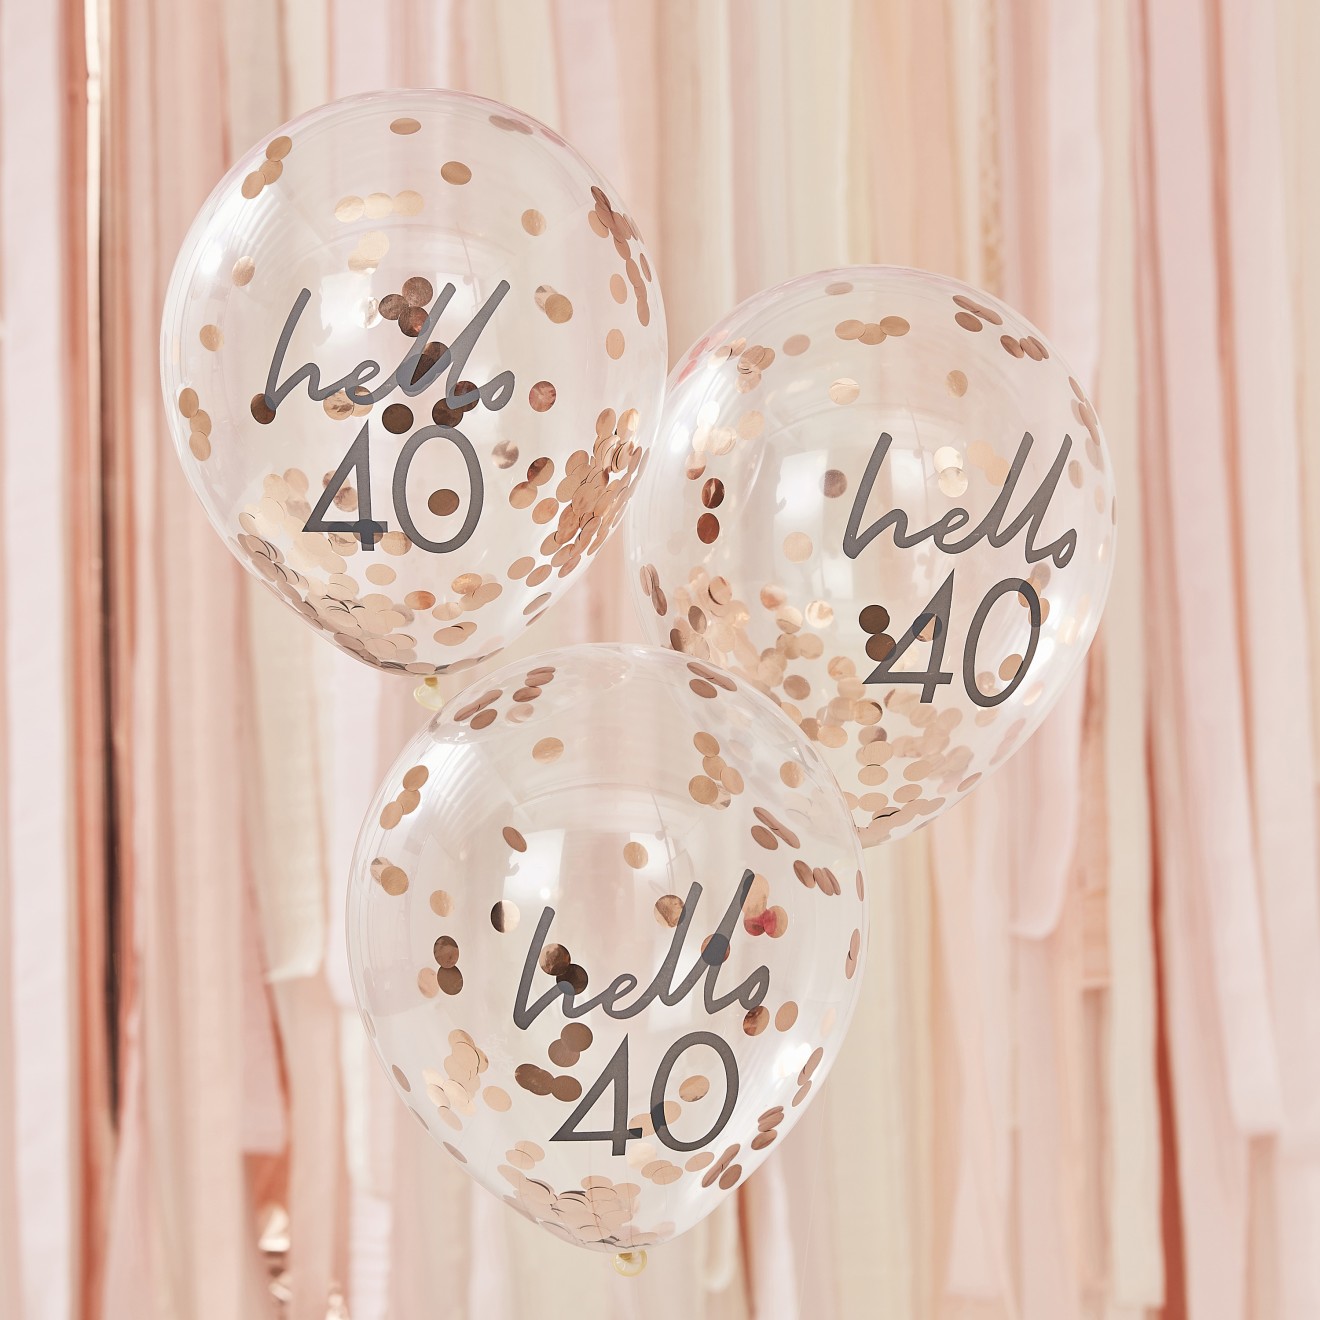 5 Rose Gold Confetti Filled 'Hello 40' Balloons